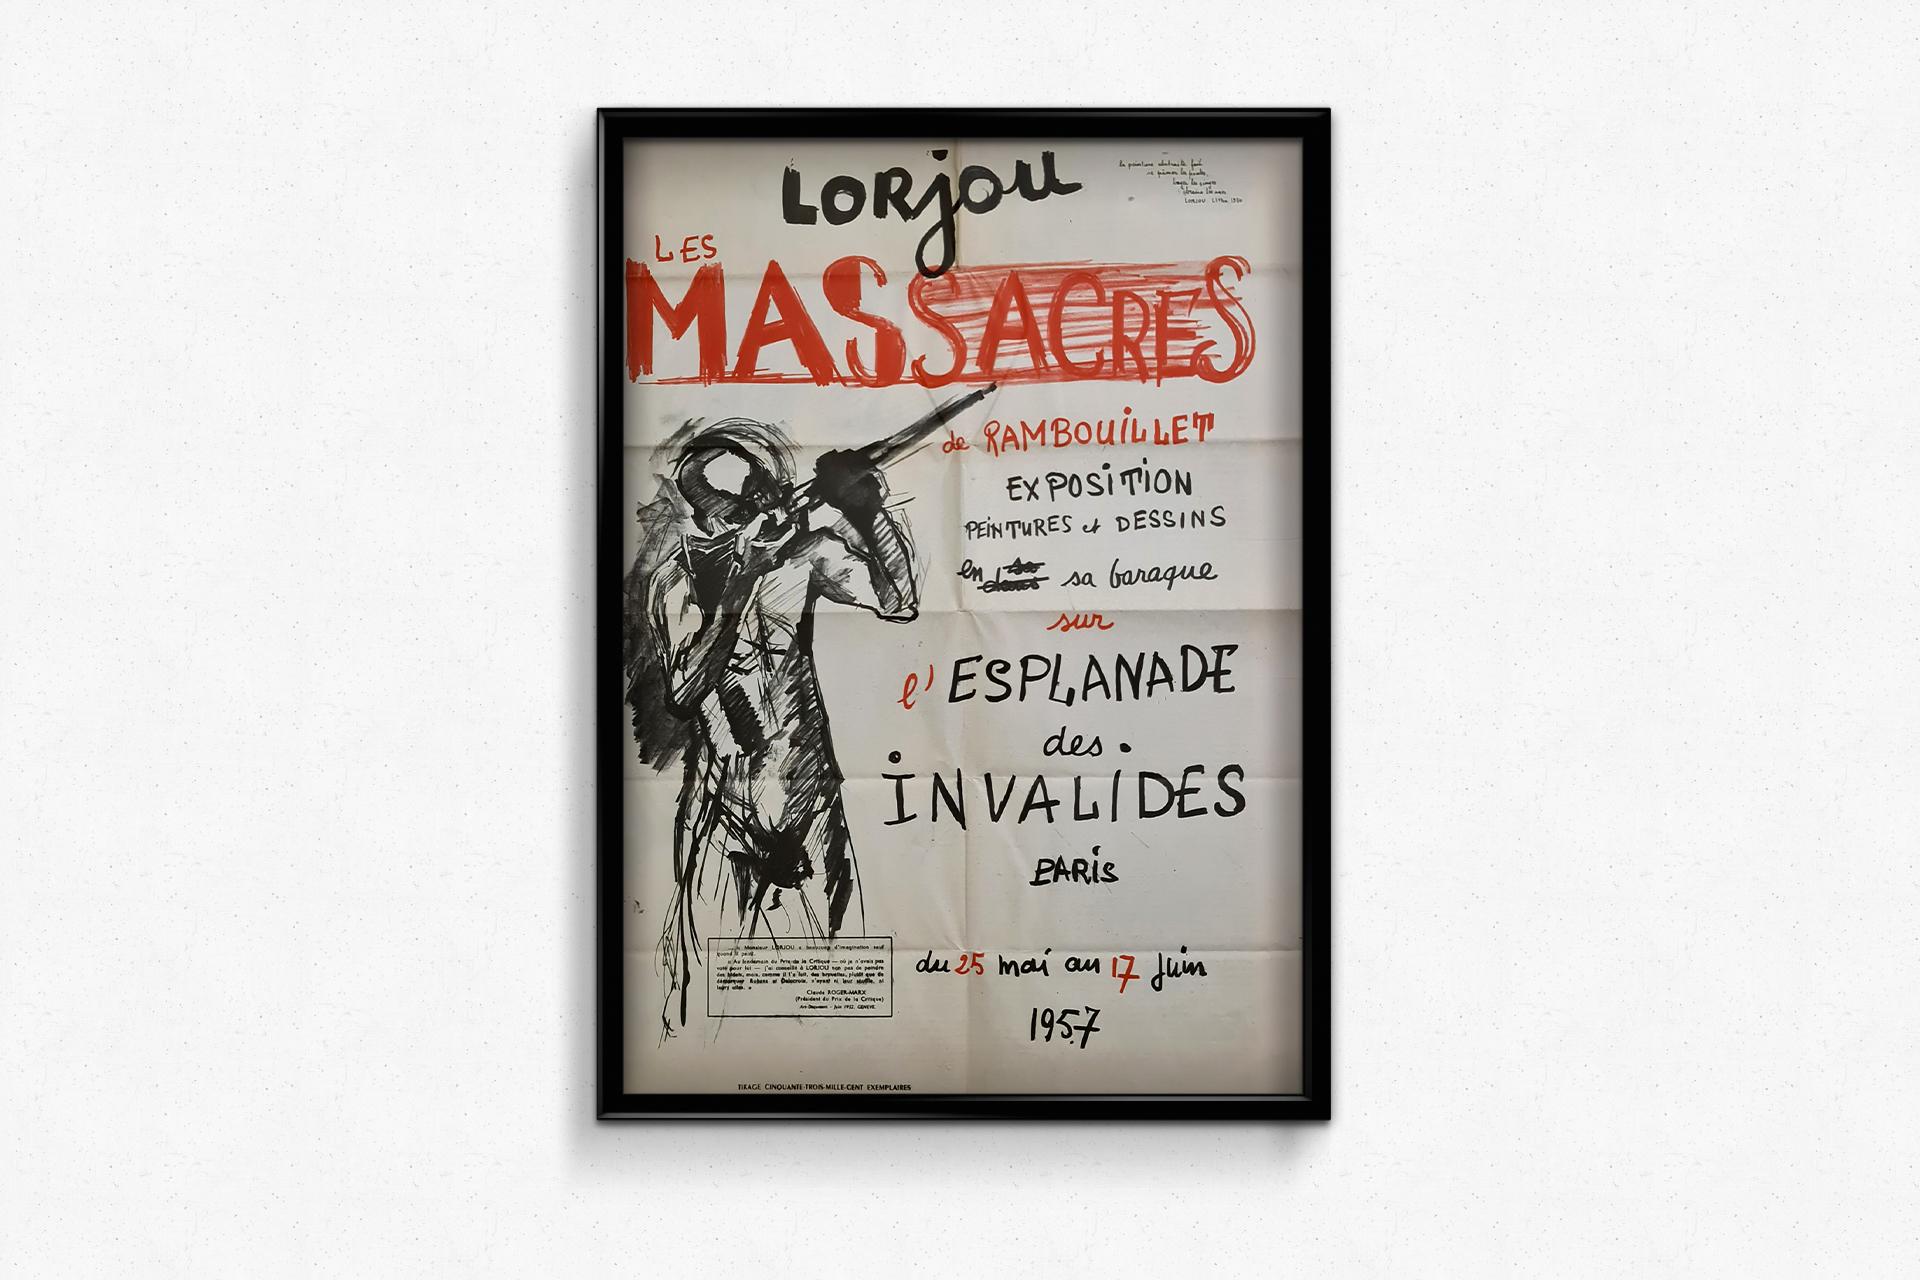 Original poster produced in 1957 by Lorjou on the exhibition 